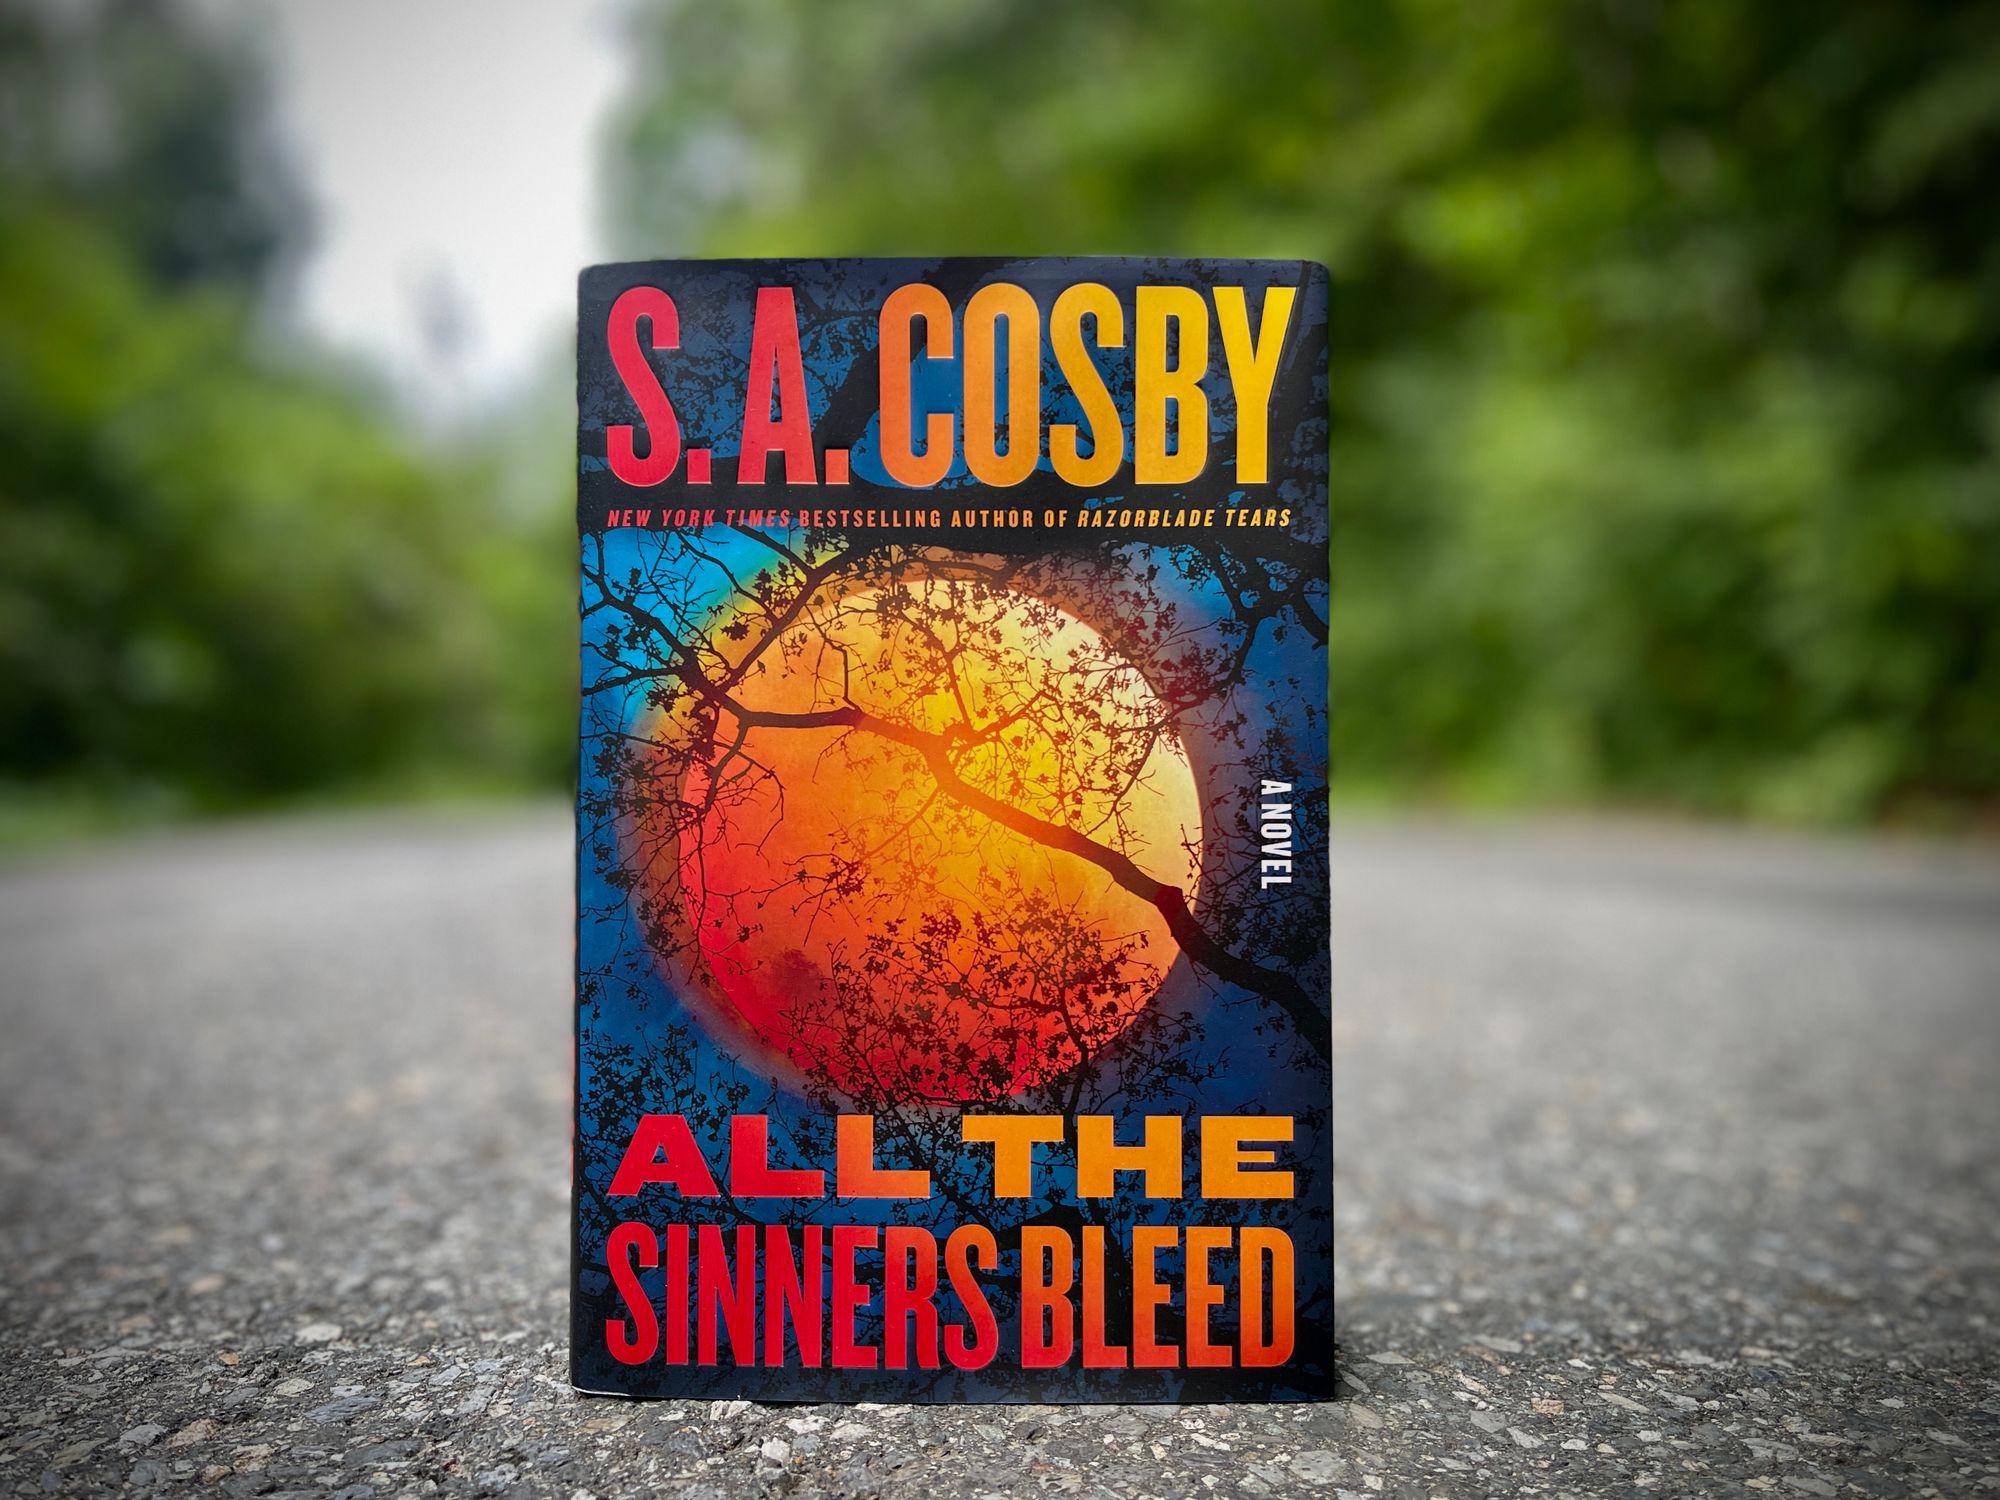 Book Review: All the Sinners Bleed by S.A. Cosby